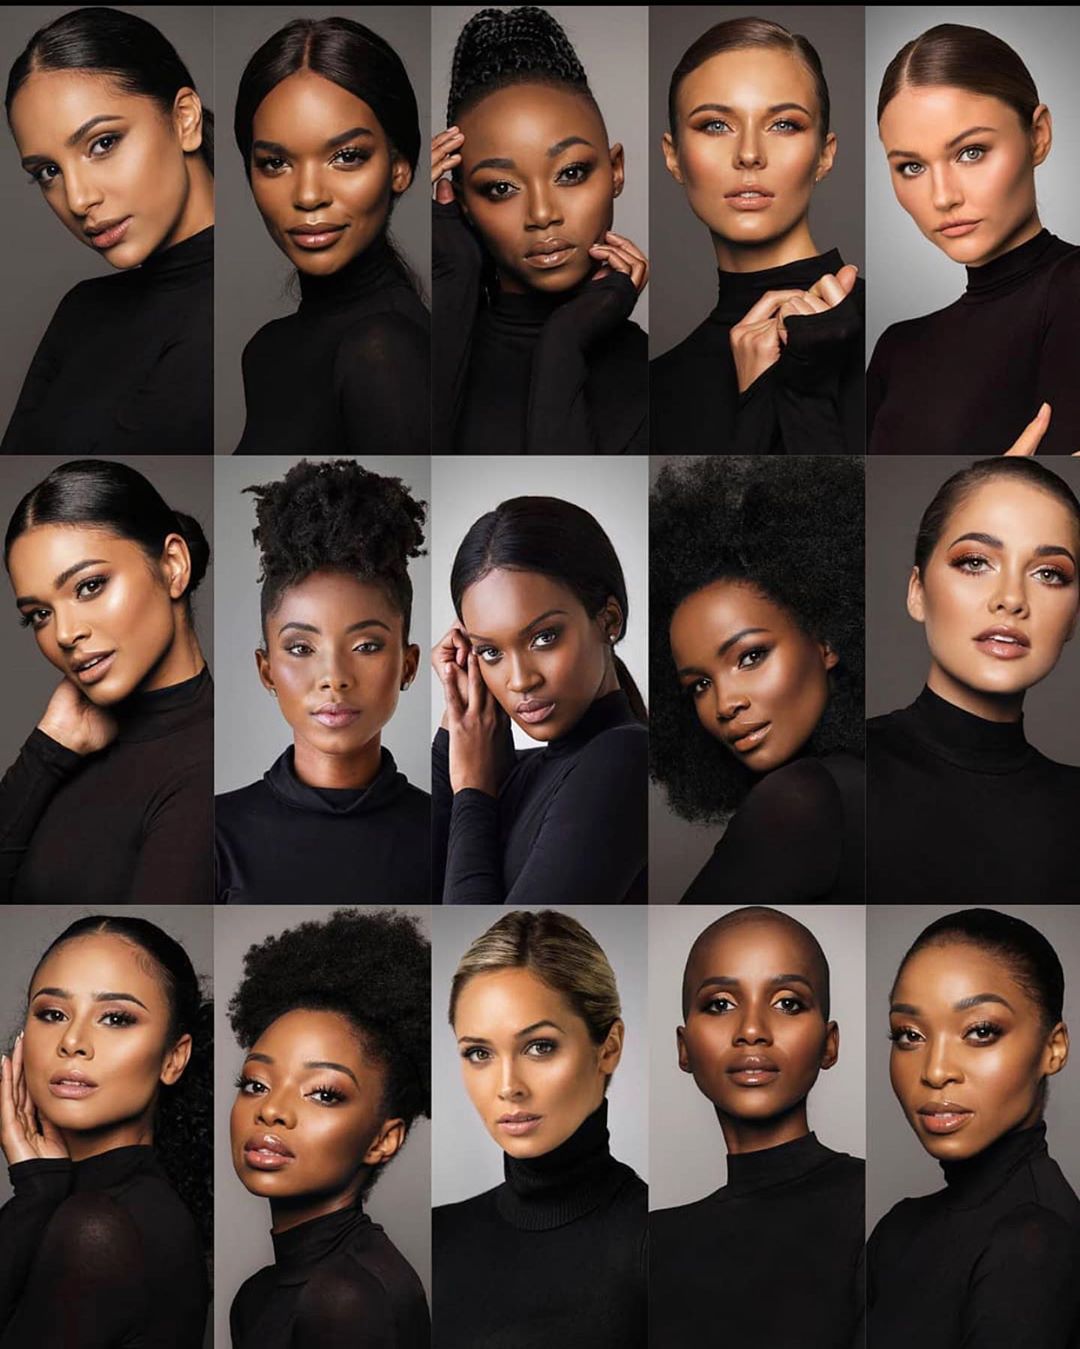 Top 15 Contestants for Miss South Africa 2020